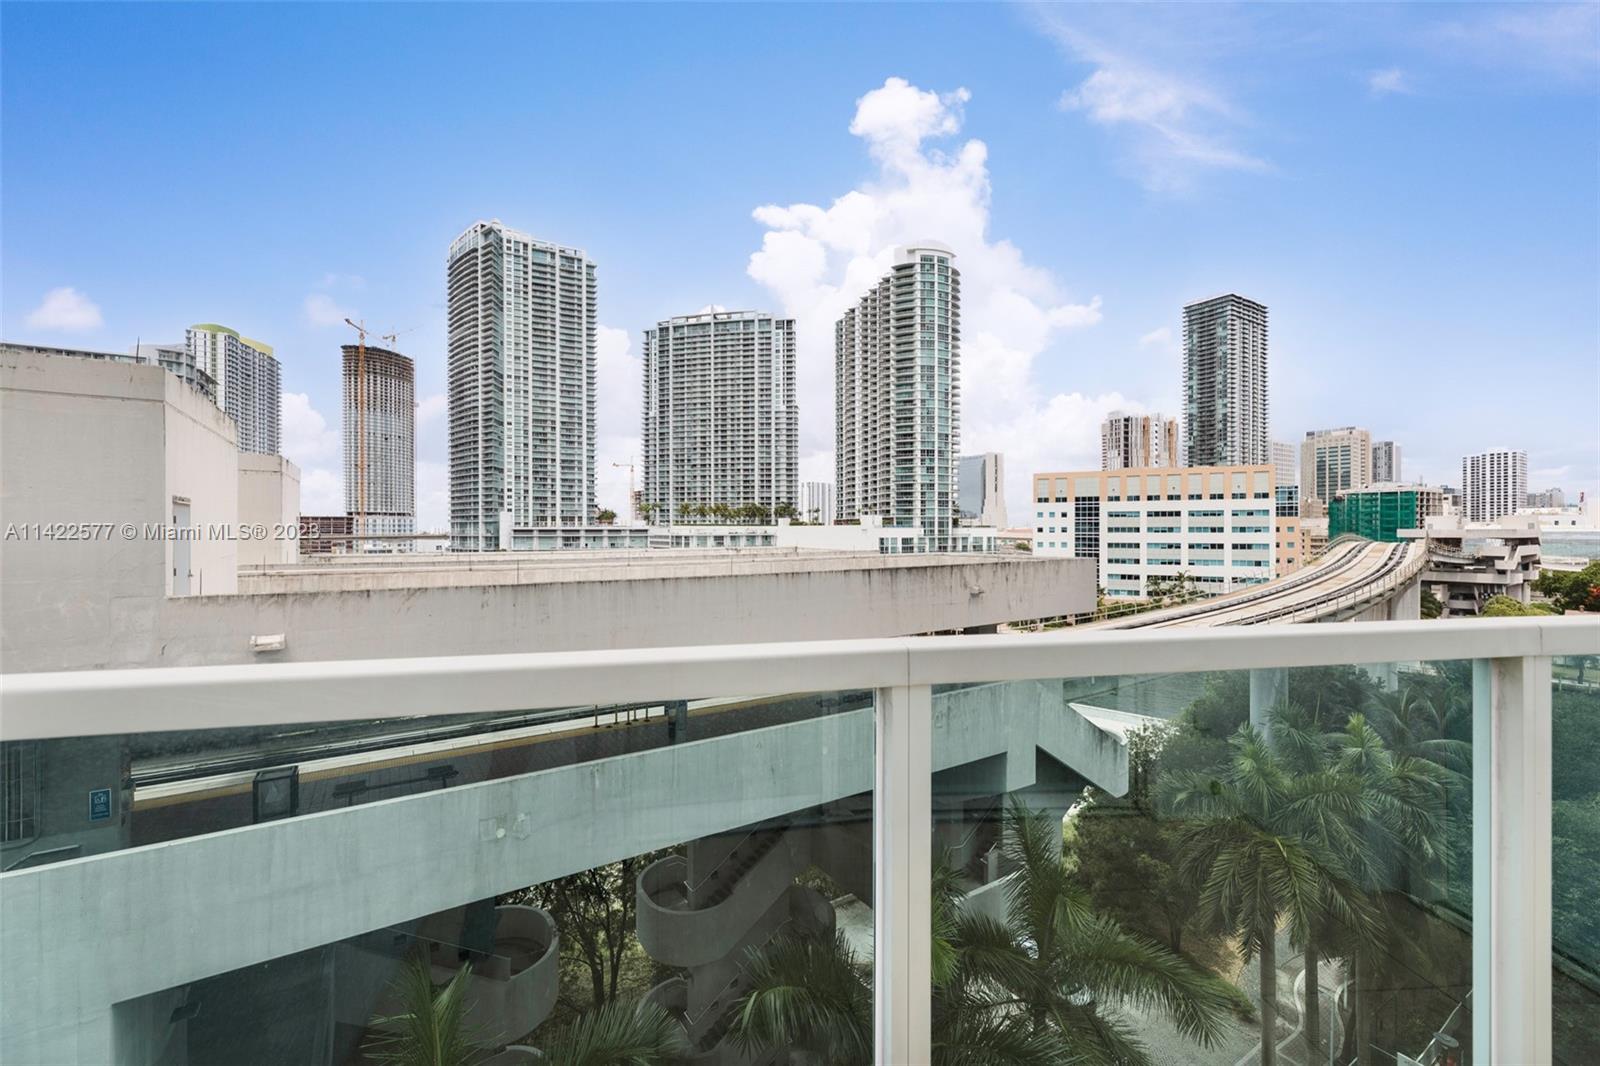 Brickell on the River South image #15